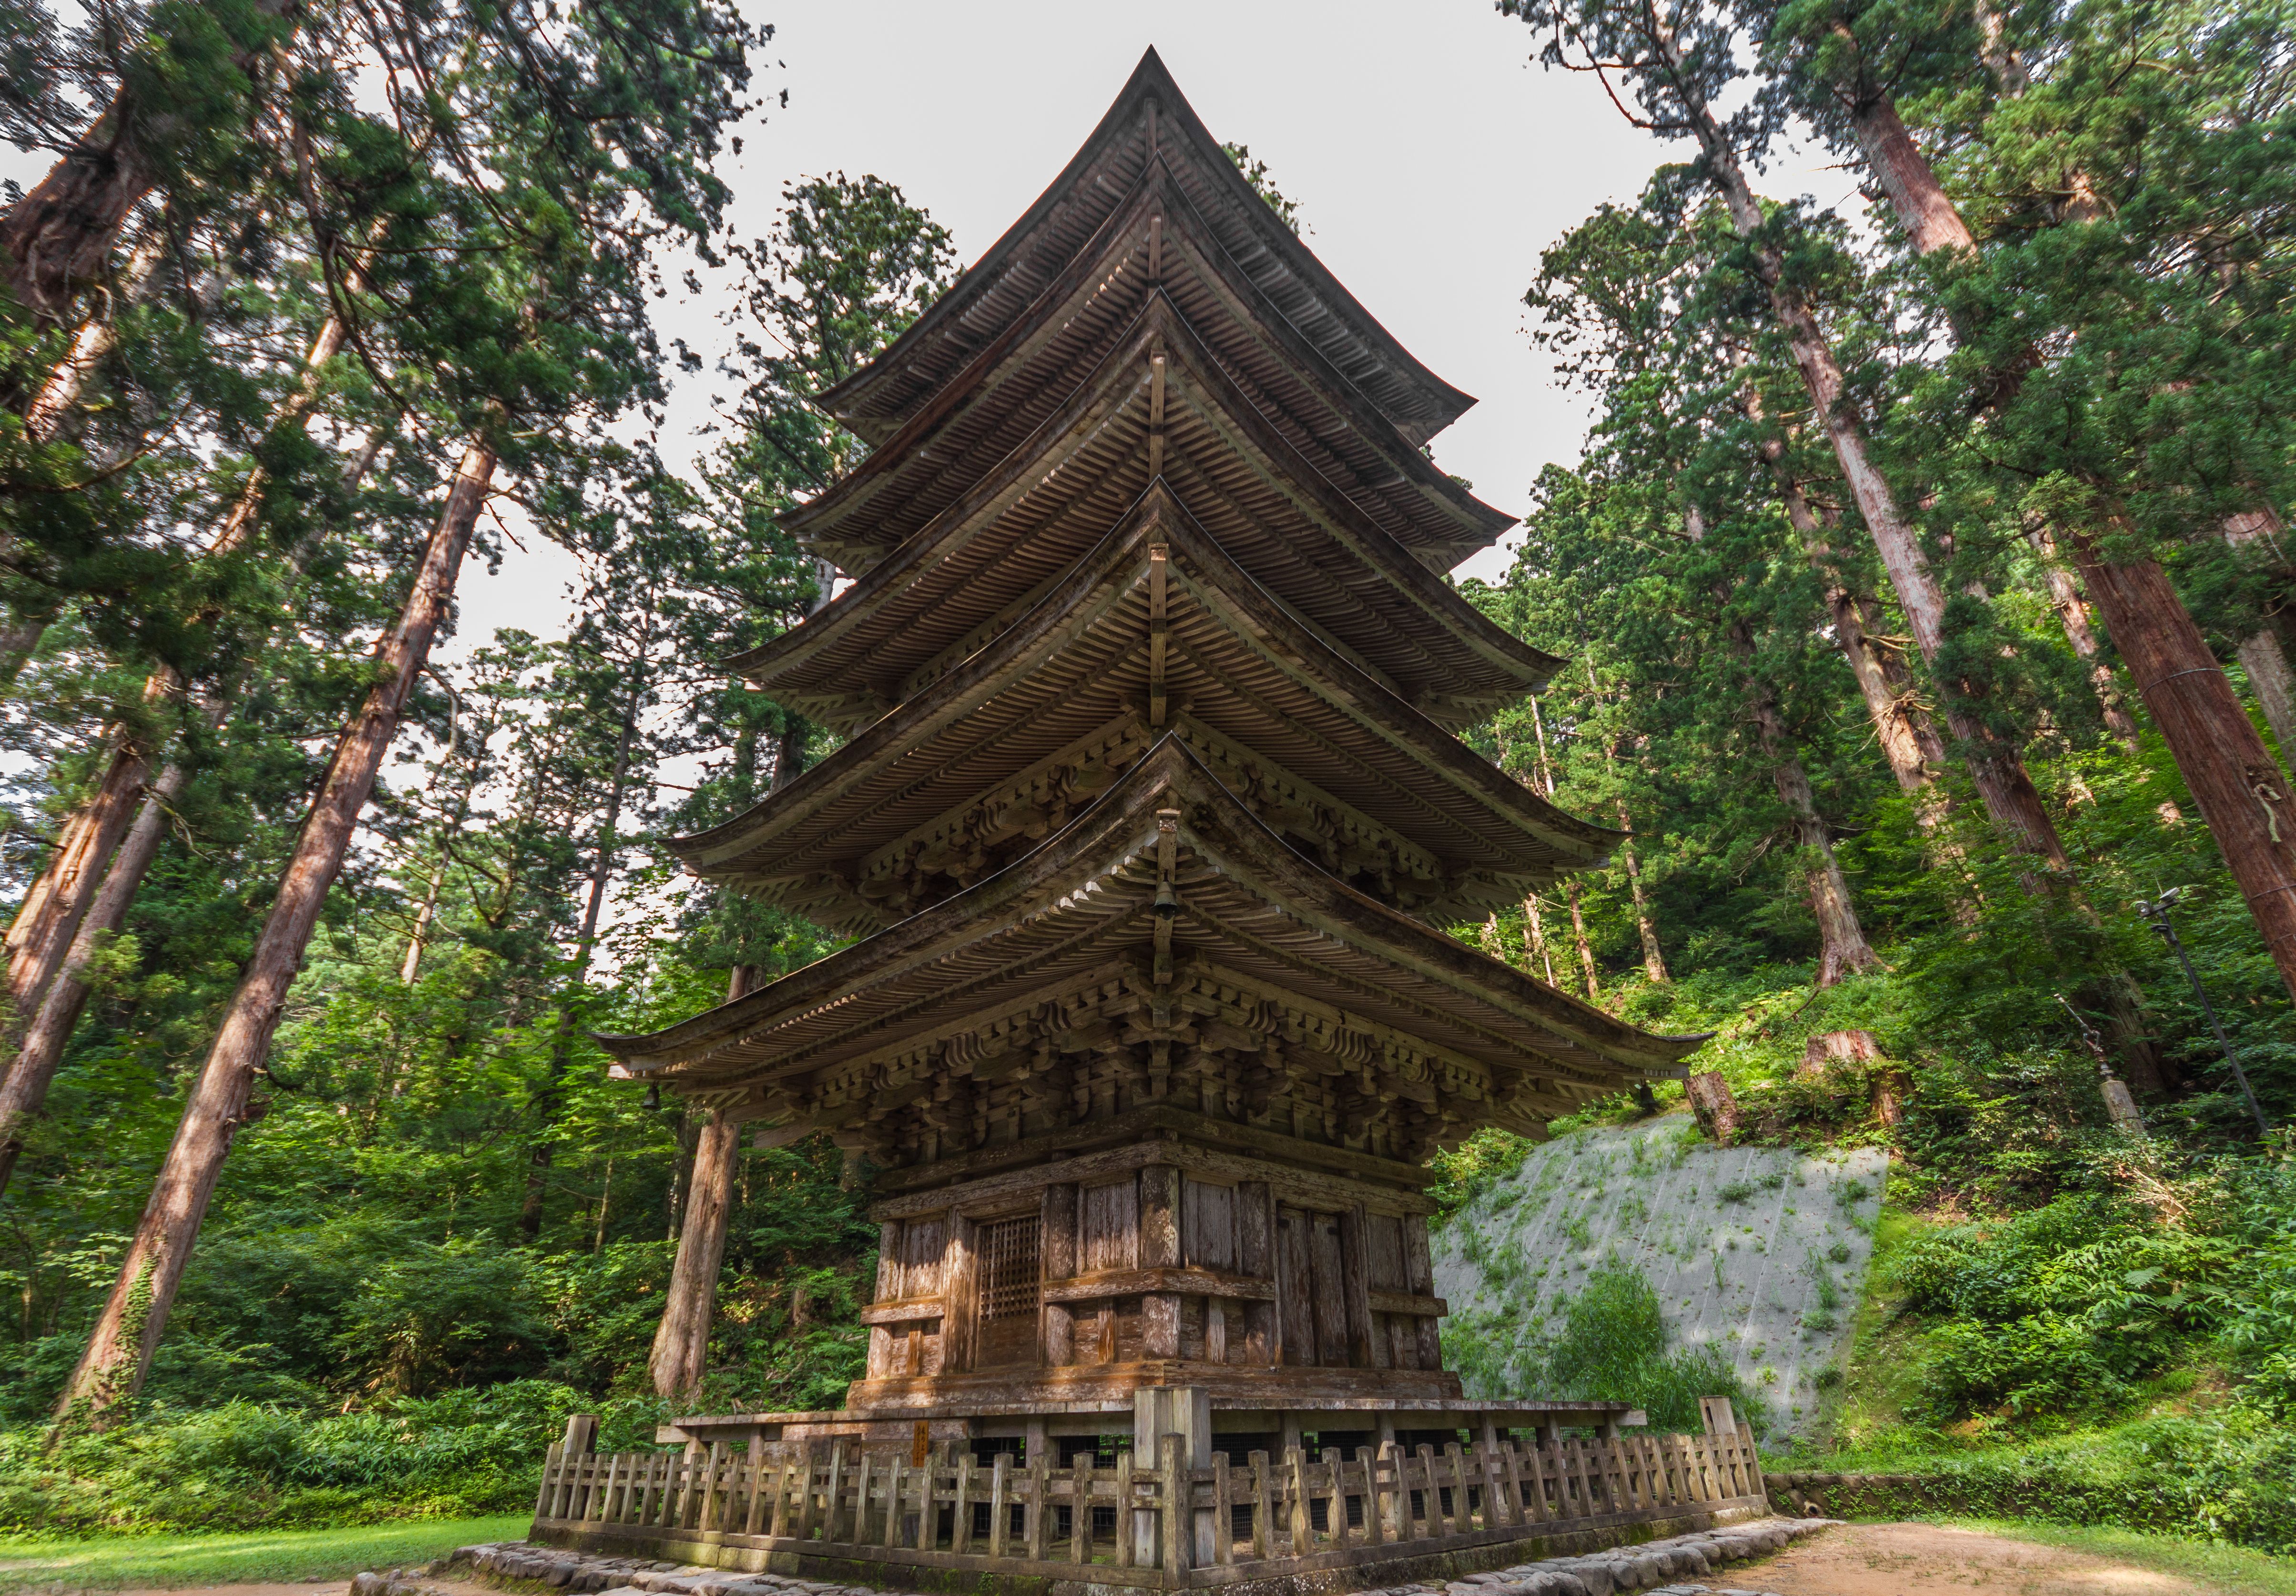 Five story pagoda in Japan